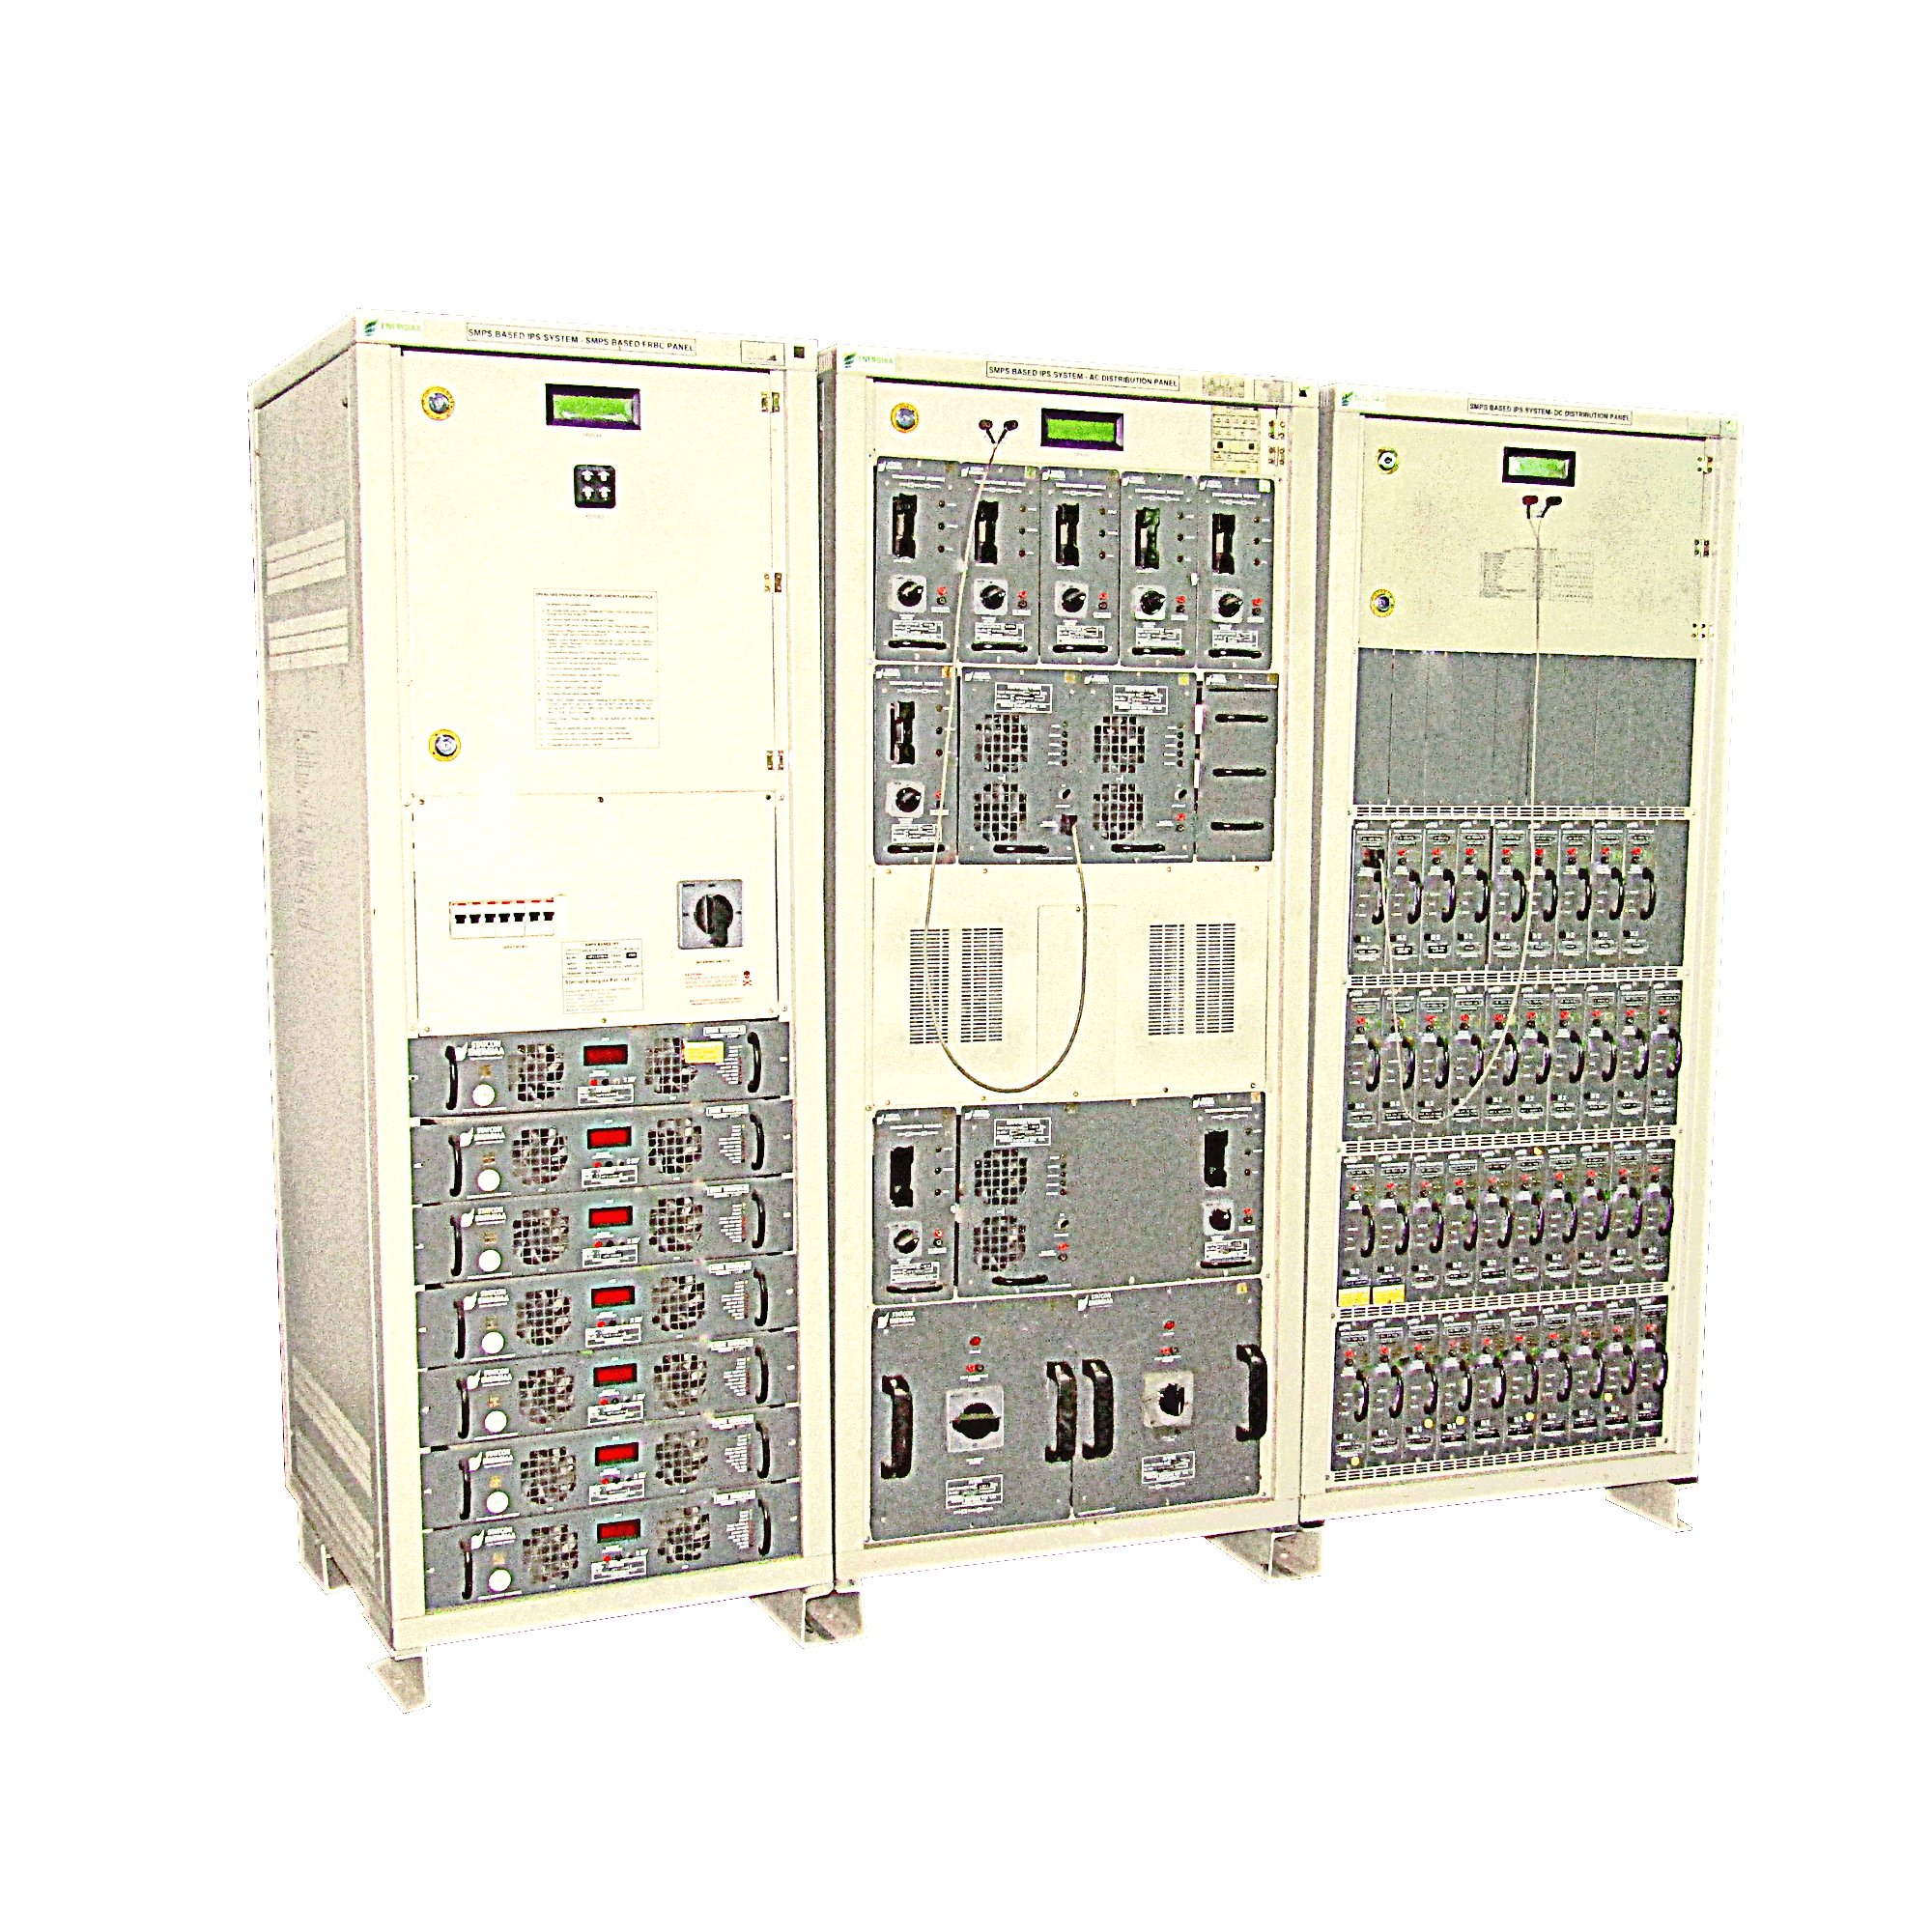 Integrated Power Supply (IPS) For Railway Signal Application